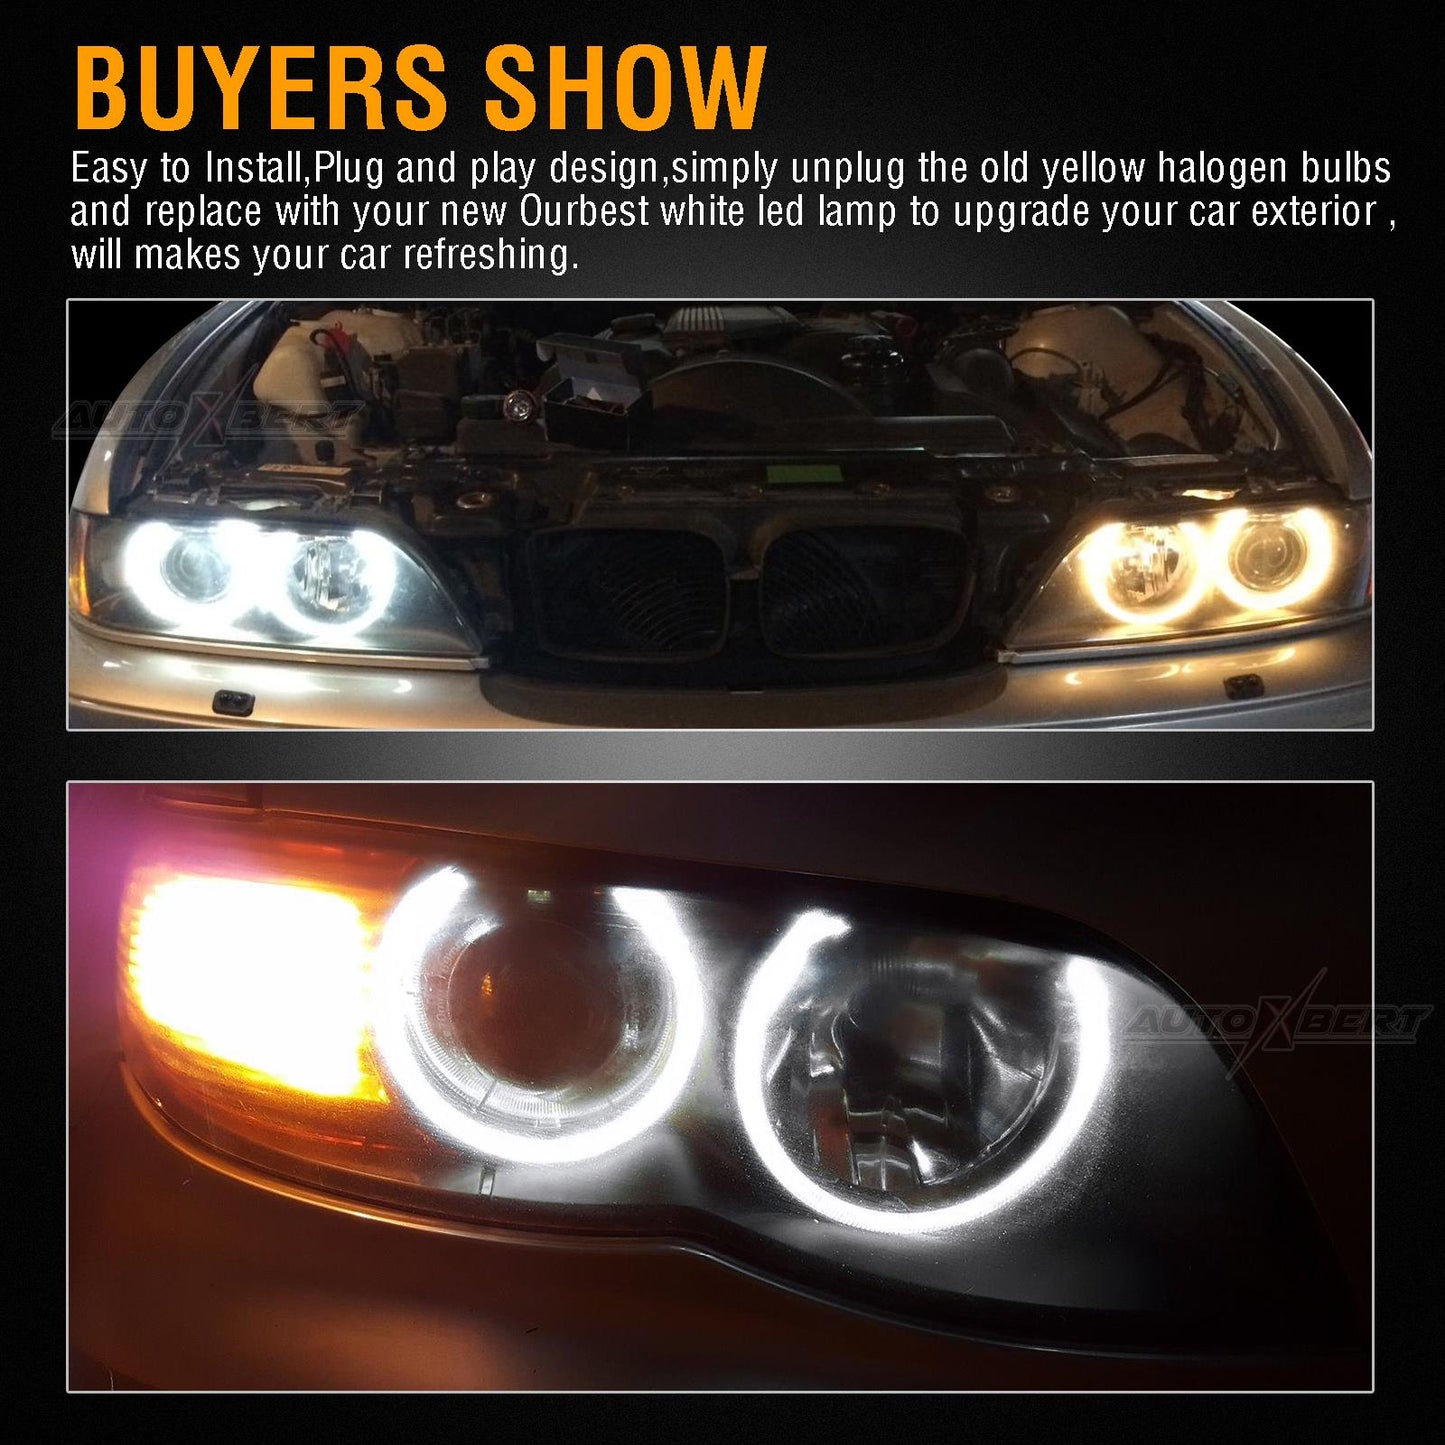 Bmw LED Angel Eyes Light Halo Ring Headlight Assembly Bulbs Lamp For BMW 3 Series E90 E91 2005-2008 Accessories White 6000K